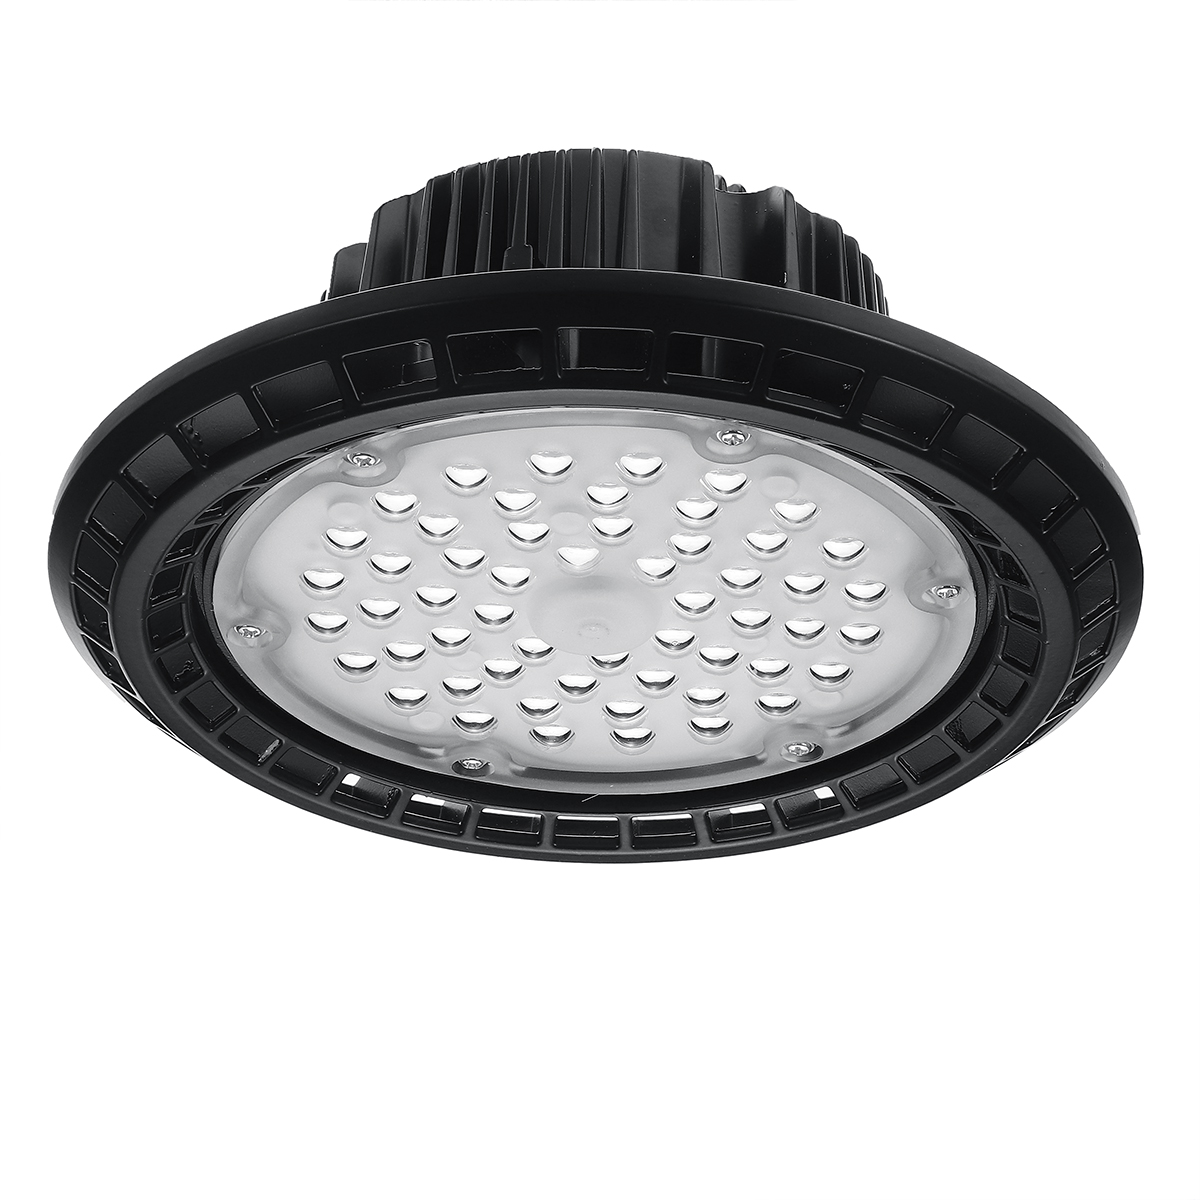 Find 60/100/150/200W LED UFO High Bay Flood Light 6000K Warehouse Industrial Lighting for Sale on Gipsybee.com with cryptocurrencies